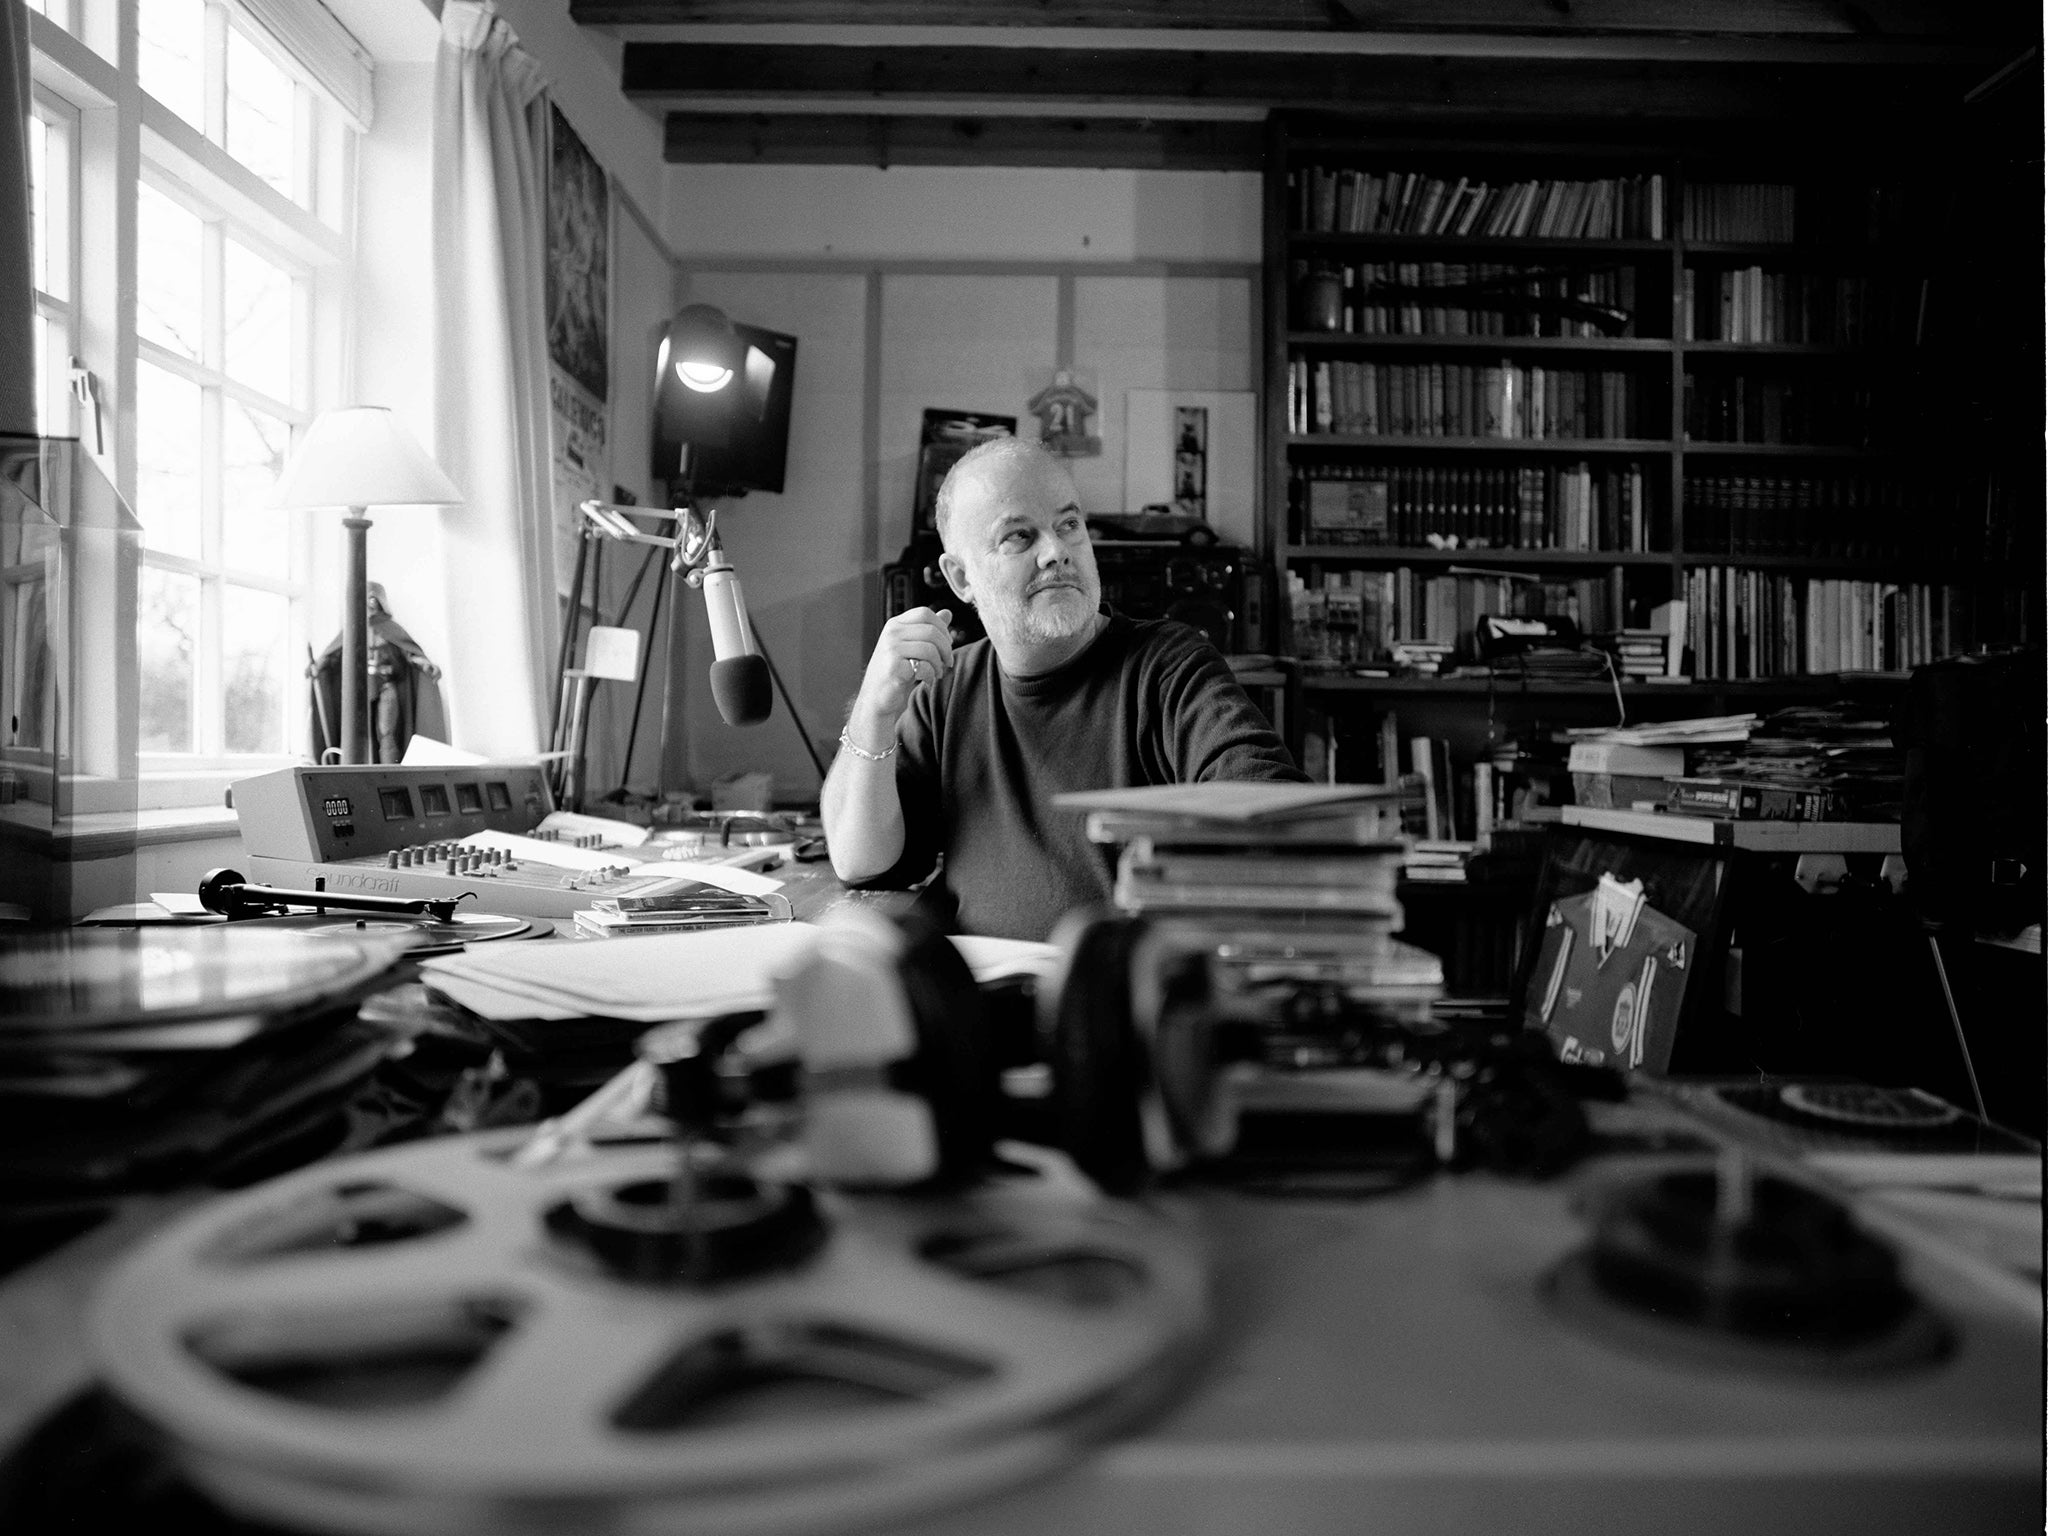 Perfumed garden: John Peel at his home studio in 2002, two years before he died unexpectedly in Peru